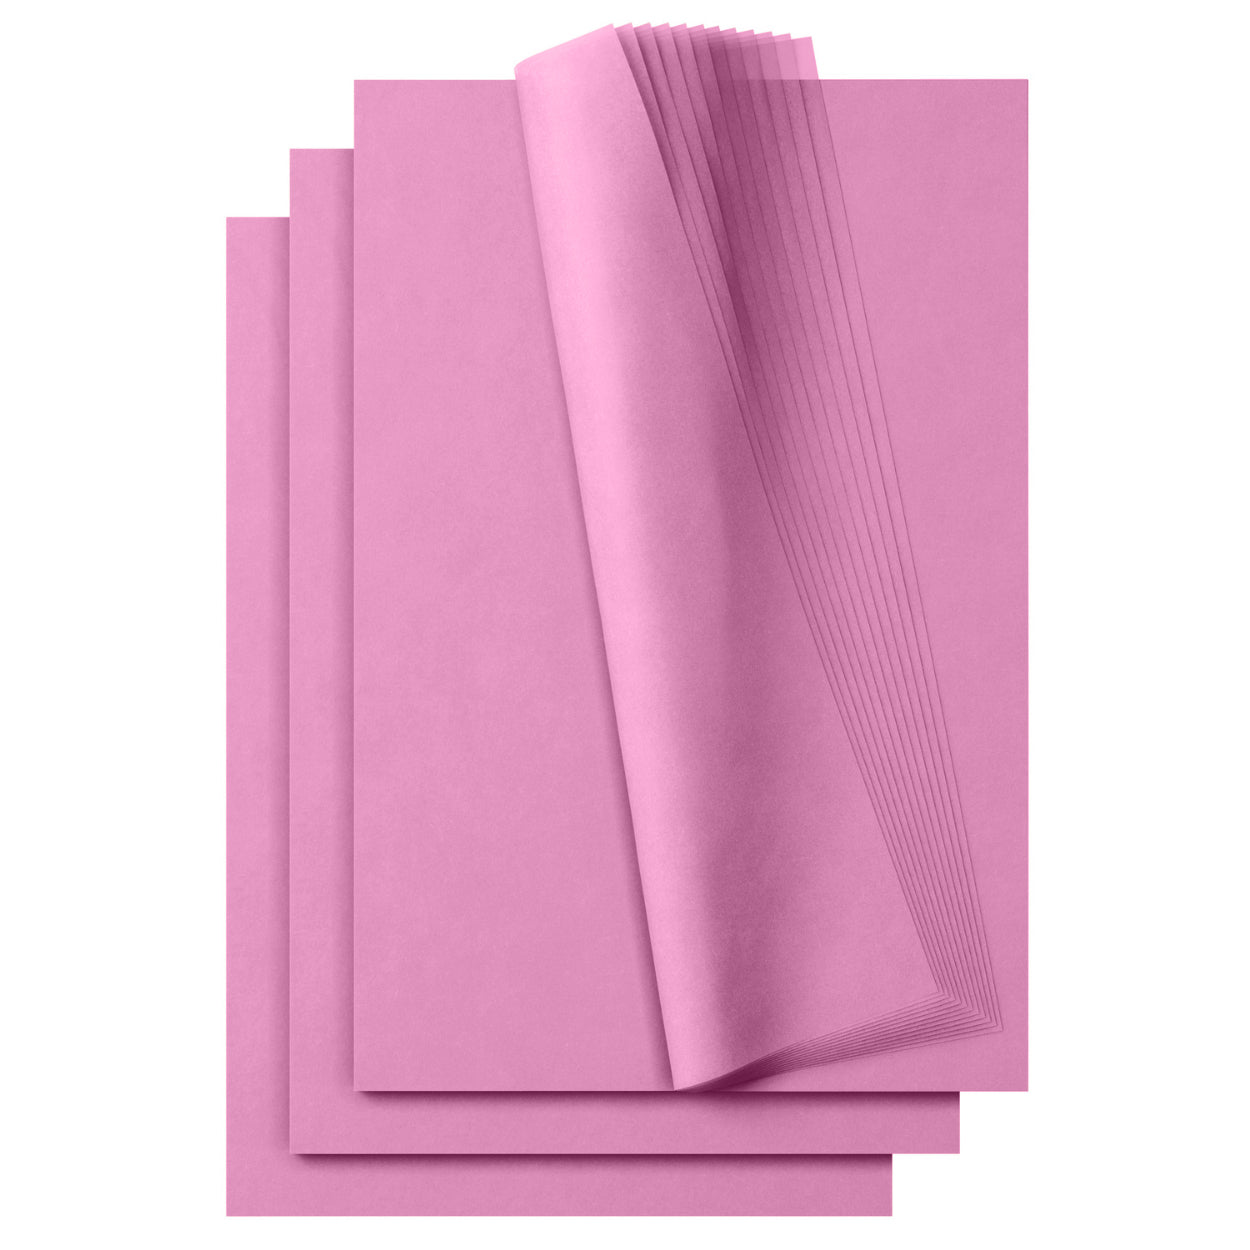 160 Sheets Blush Pink Tissue Paper for Gift Wrapping Bags, Bulk Set, 15 x  20, PACK - Kroger